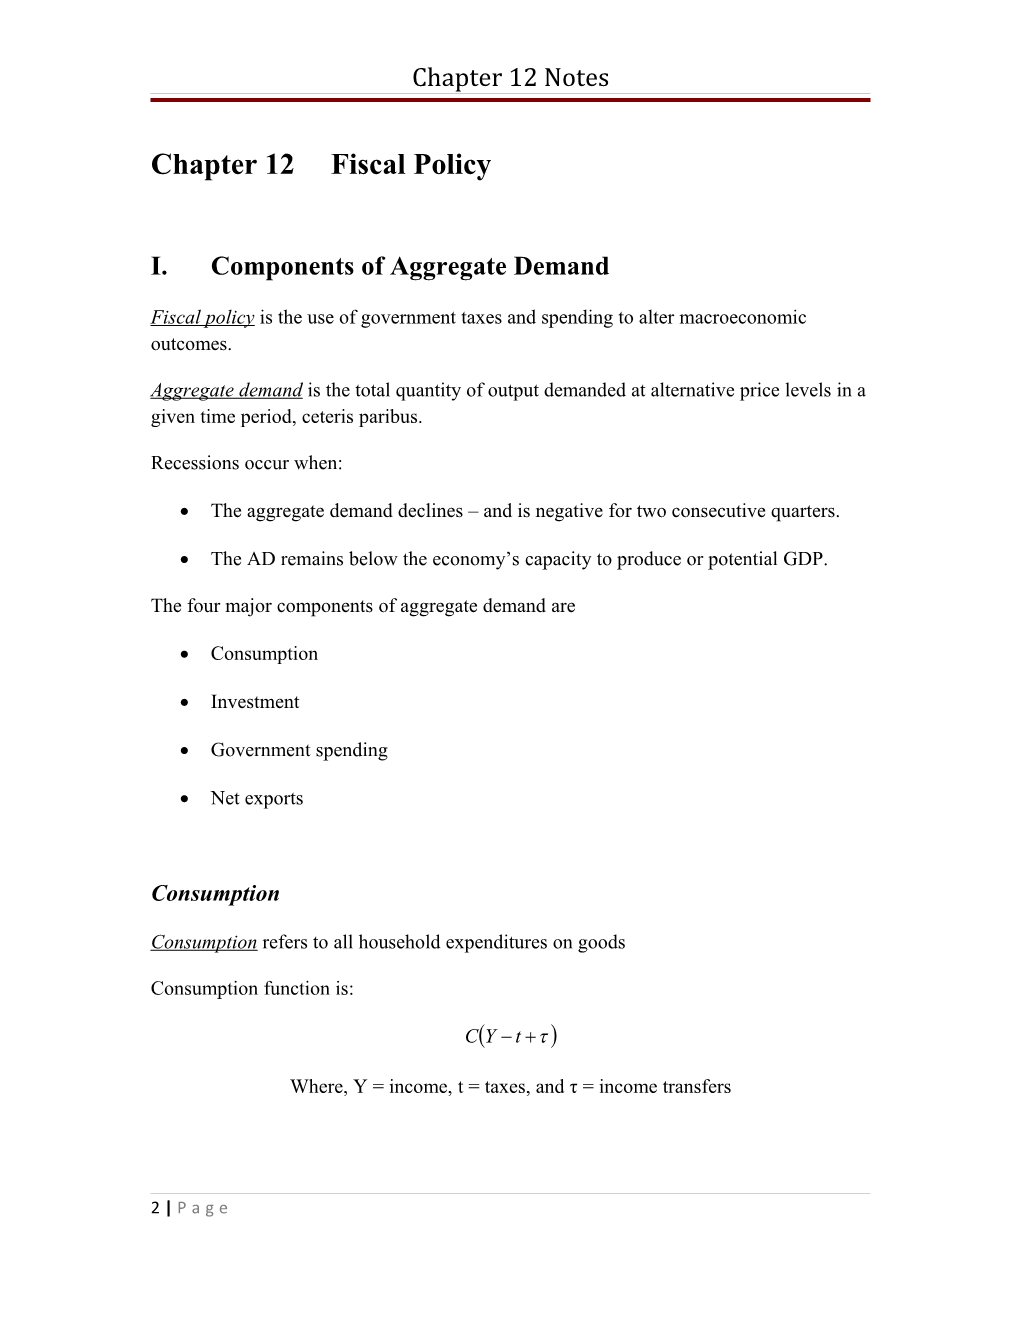 Chapter 12Fiscal Policy